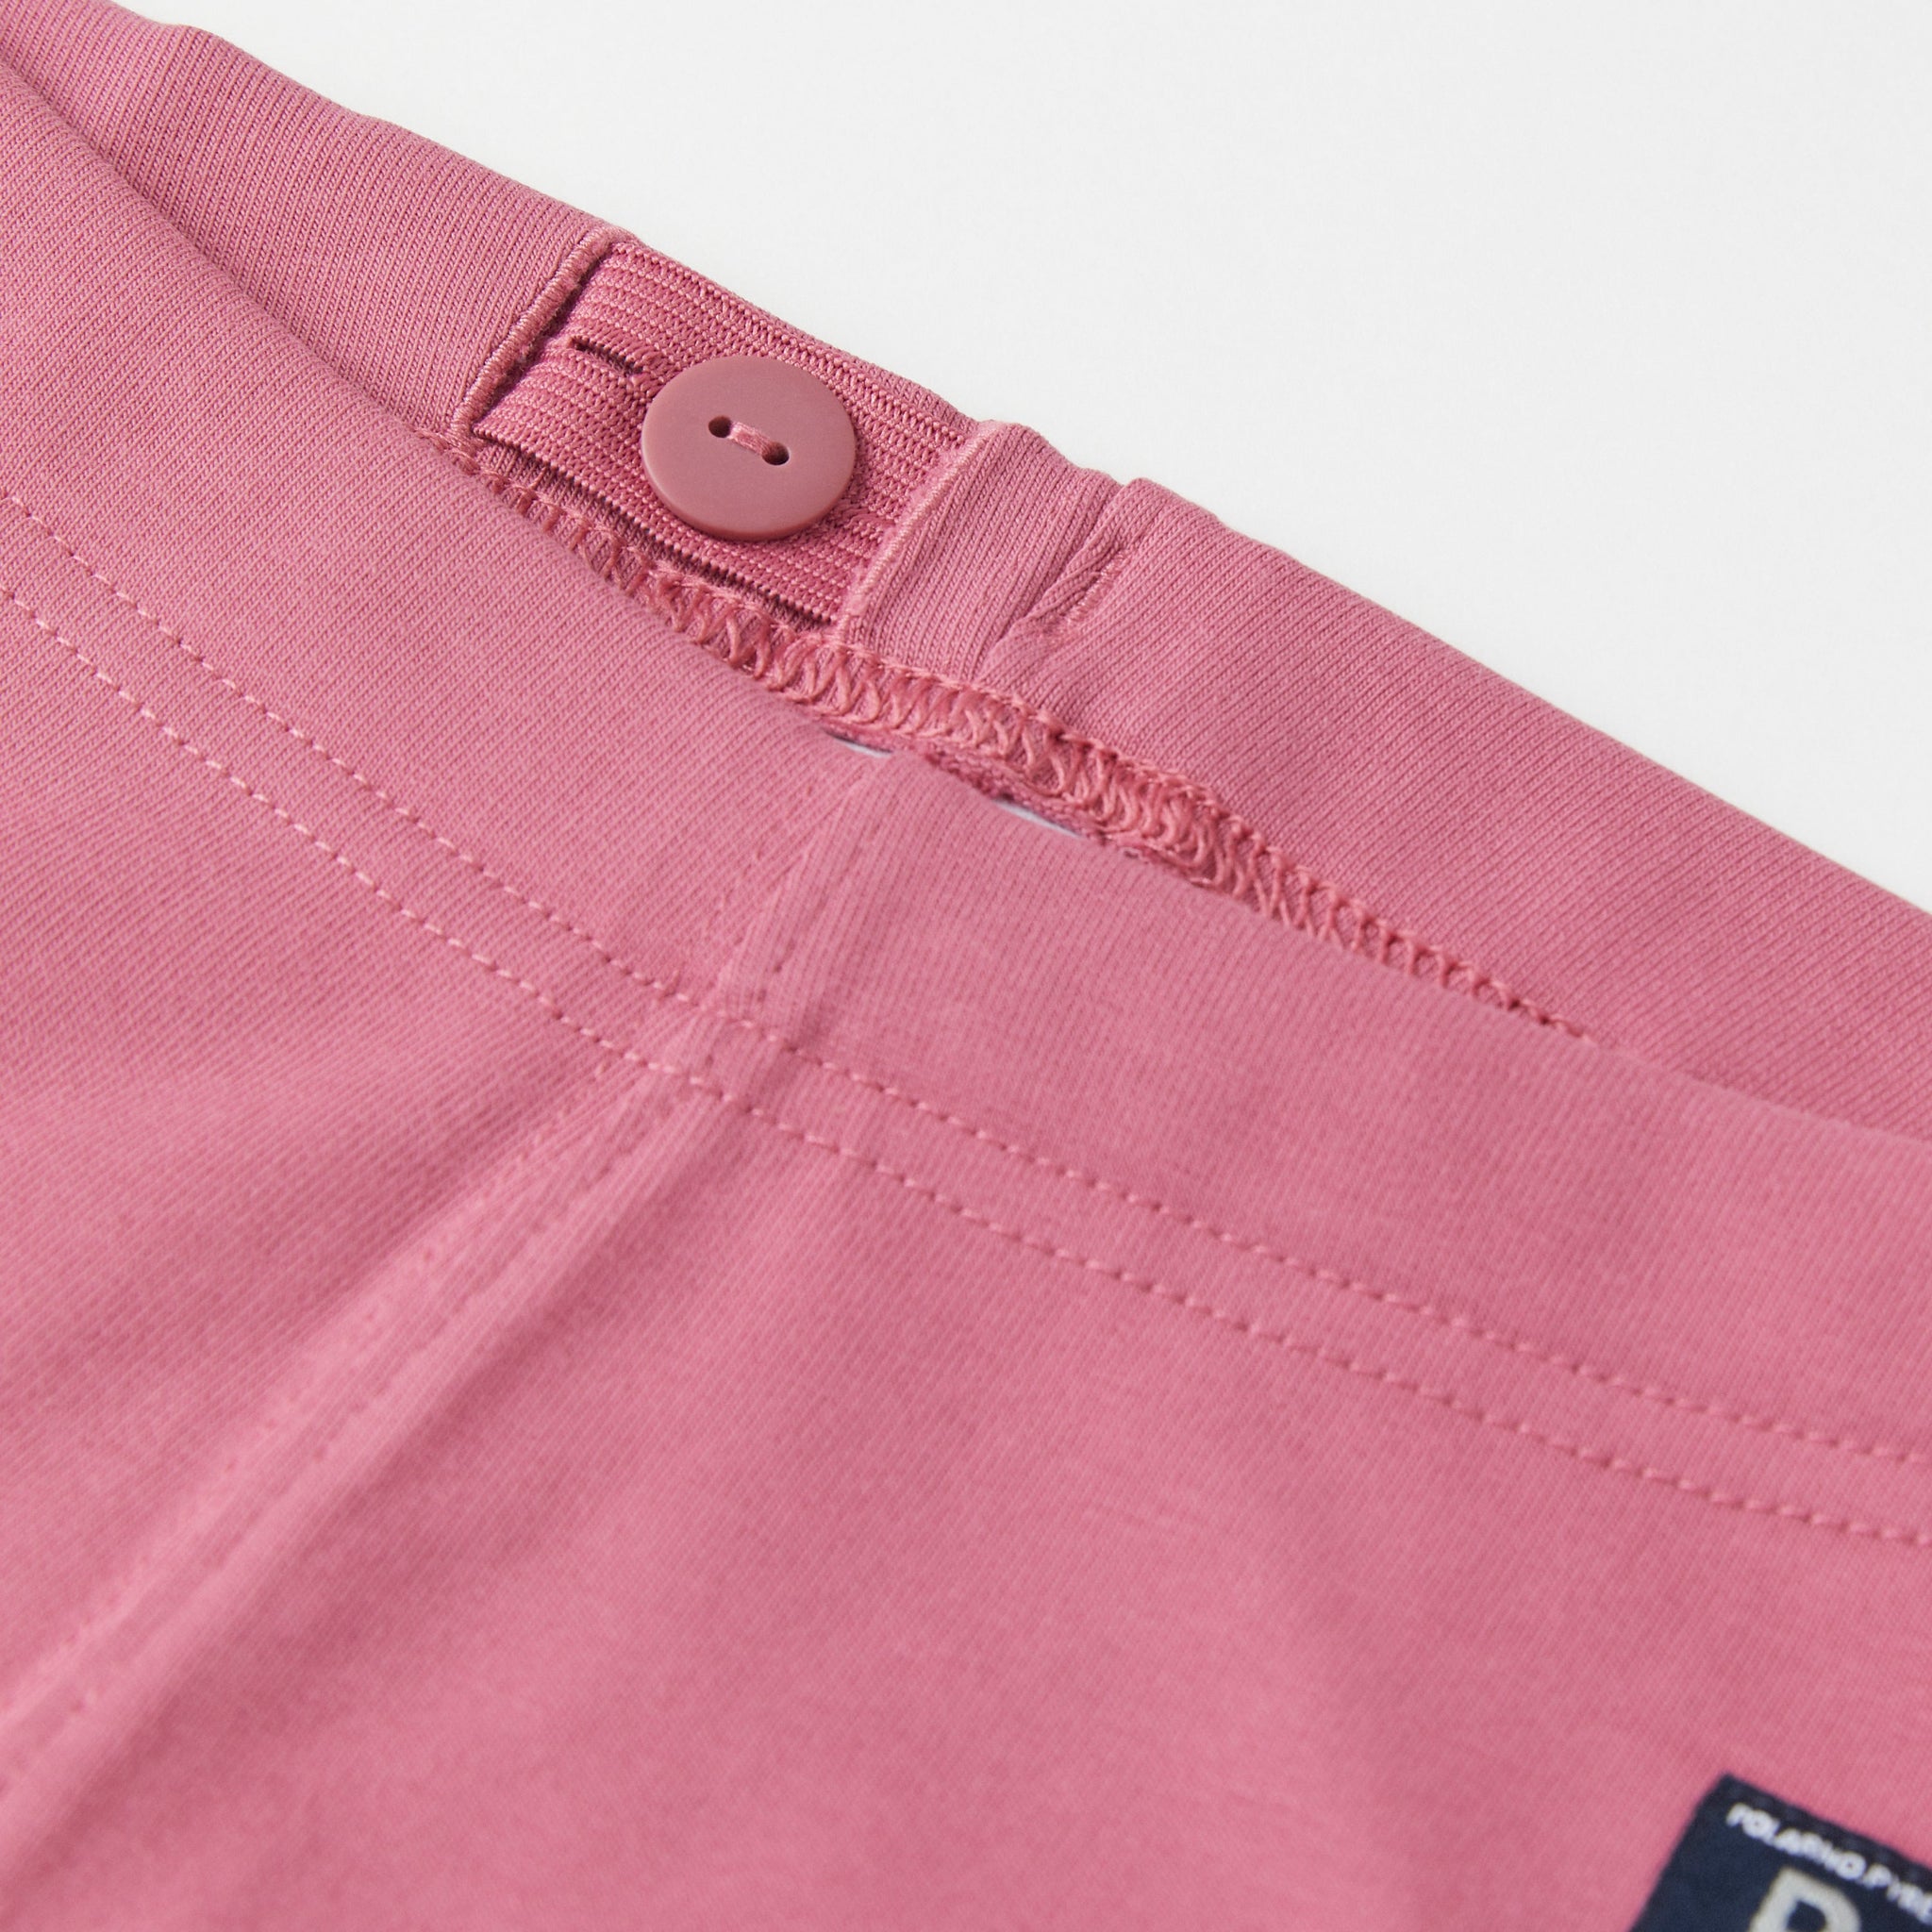 Organic Cotton Pink Kids Leggings from the Polarn O. Pyret Kidswear collection. The best ethical kids clothes